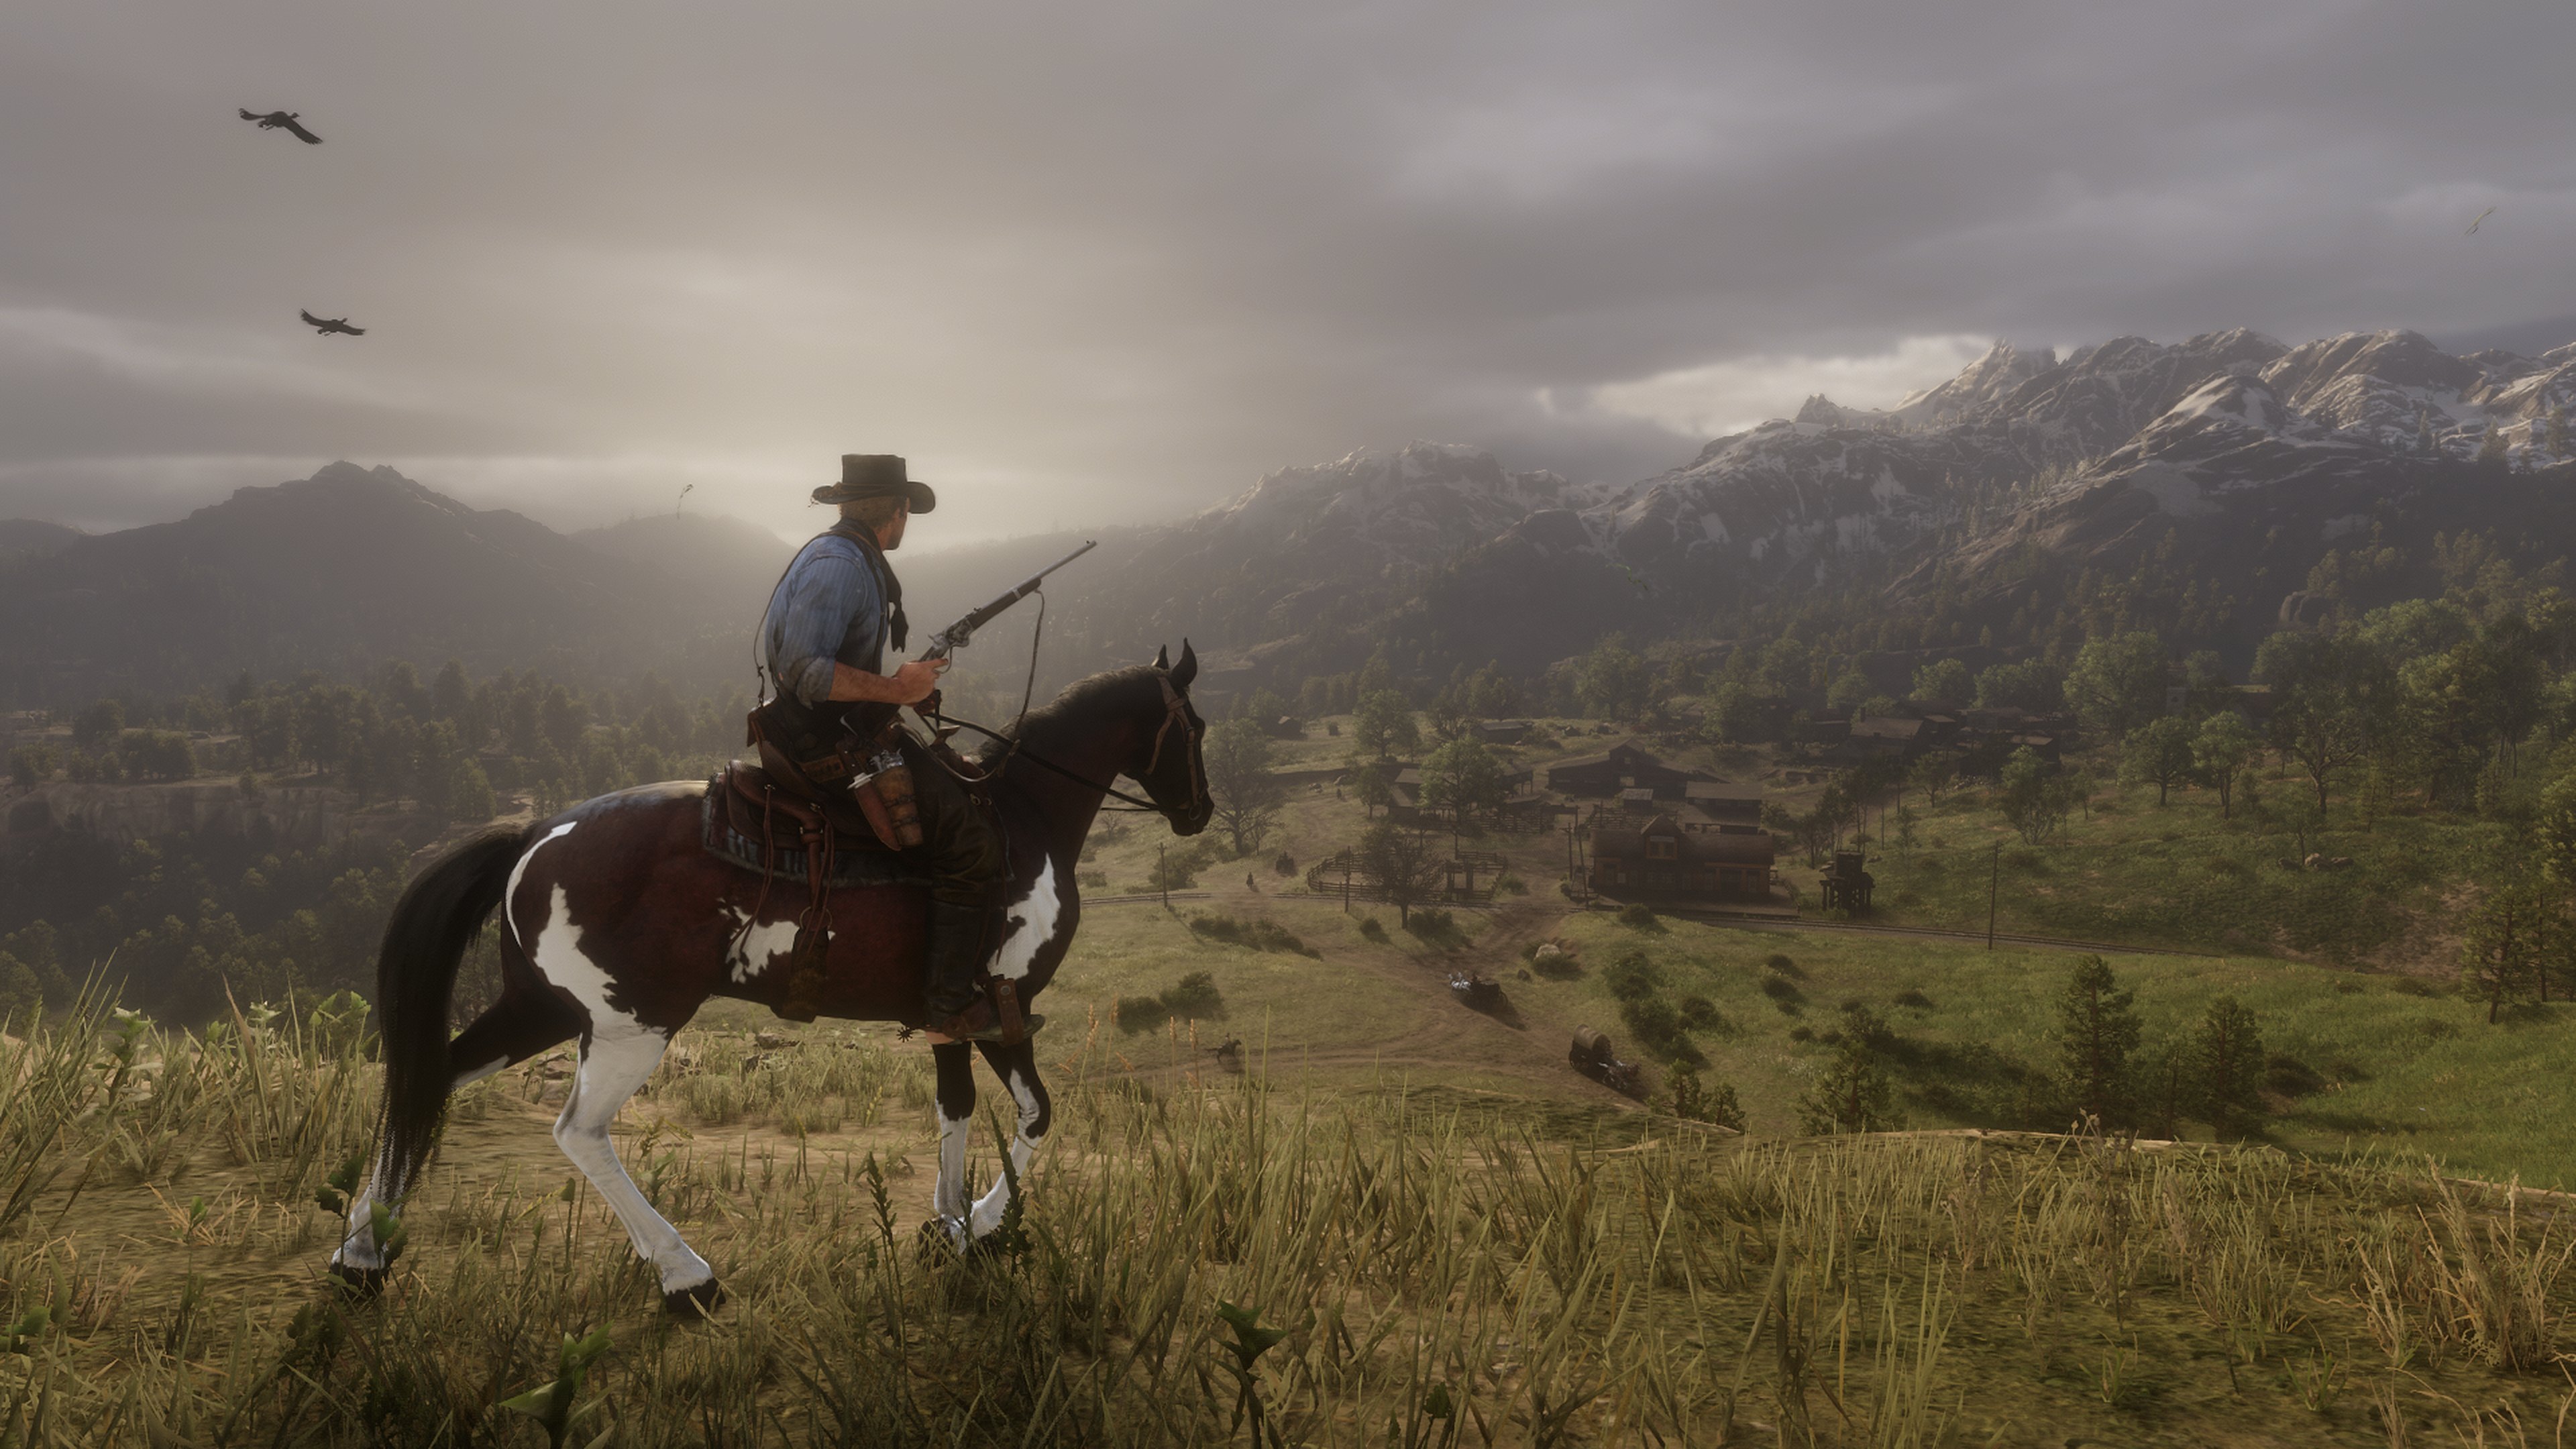 Video Game Red Dead Redemption 2 HD Wallpaper | Background Image